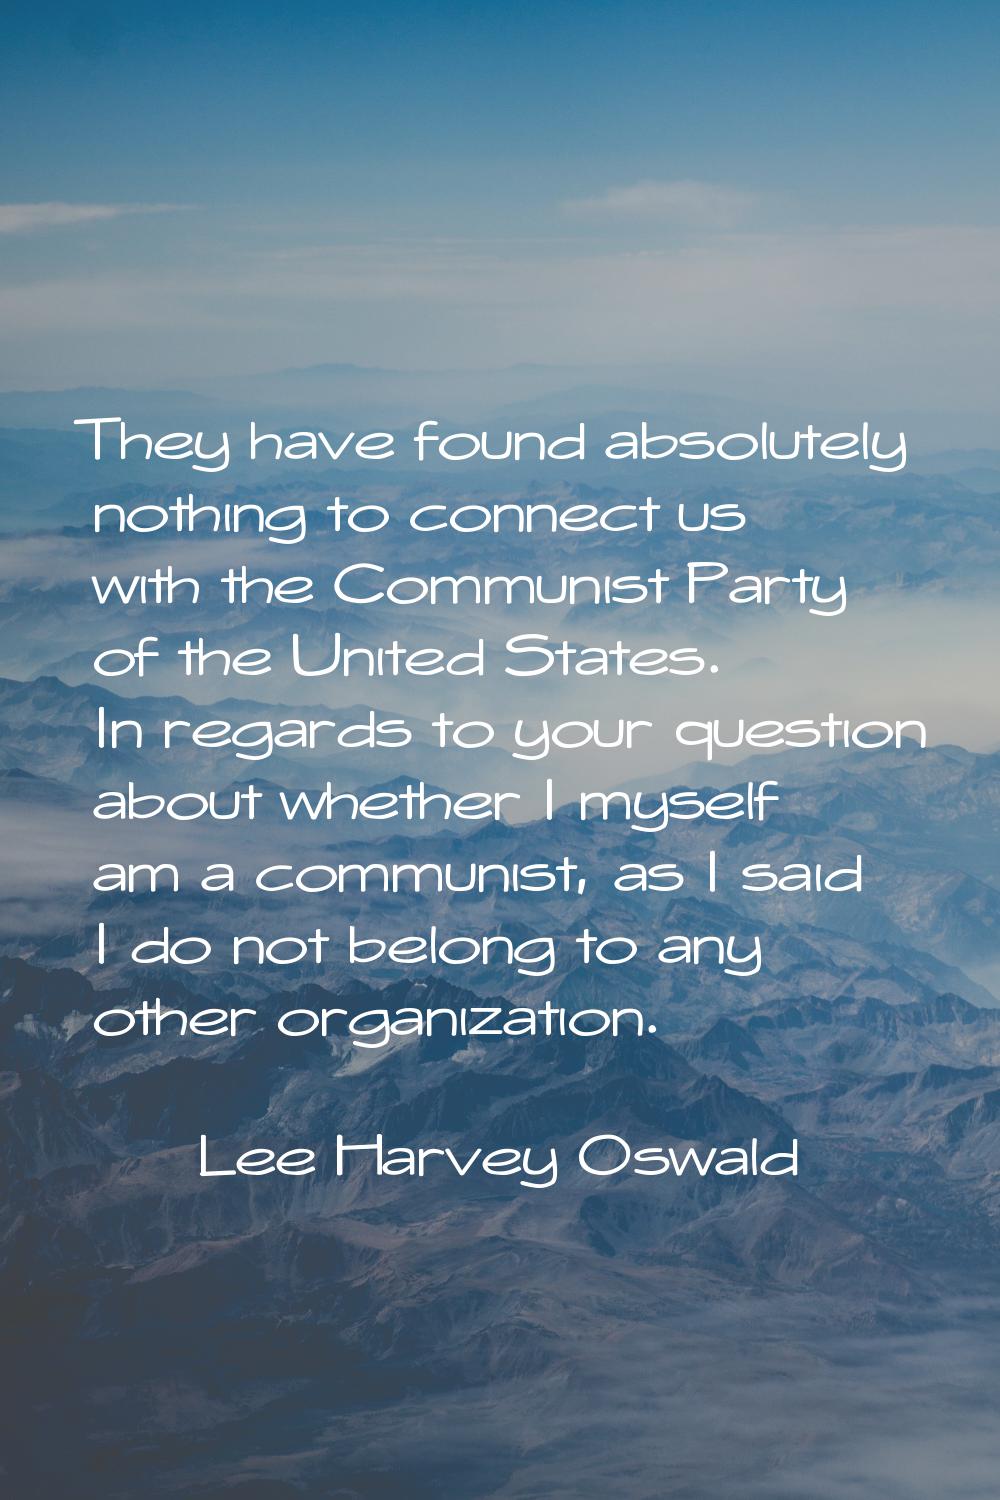 They have found absolutely nothing to connect us with the Communist Party of the United States. In 